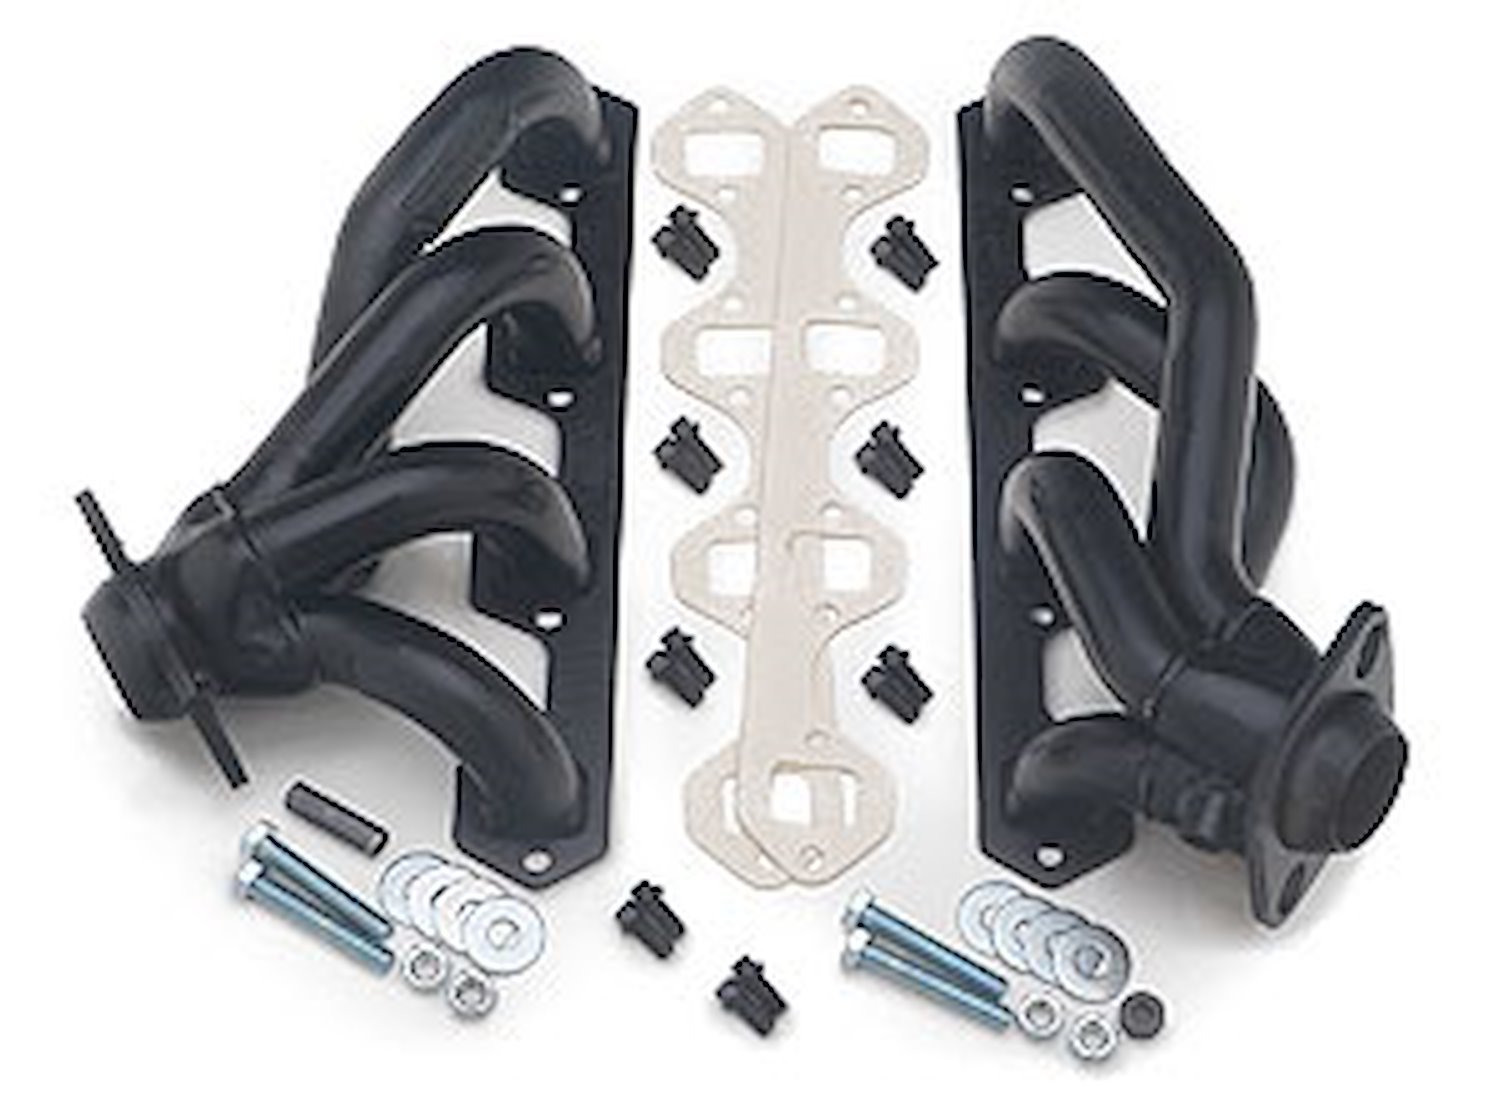 Standard Duty Uncoated Headers for 1986-96 F-150 & Bronco 5.0L